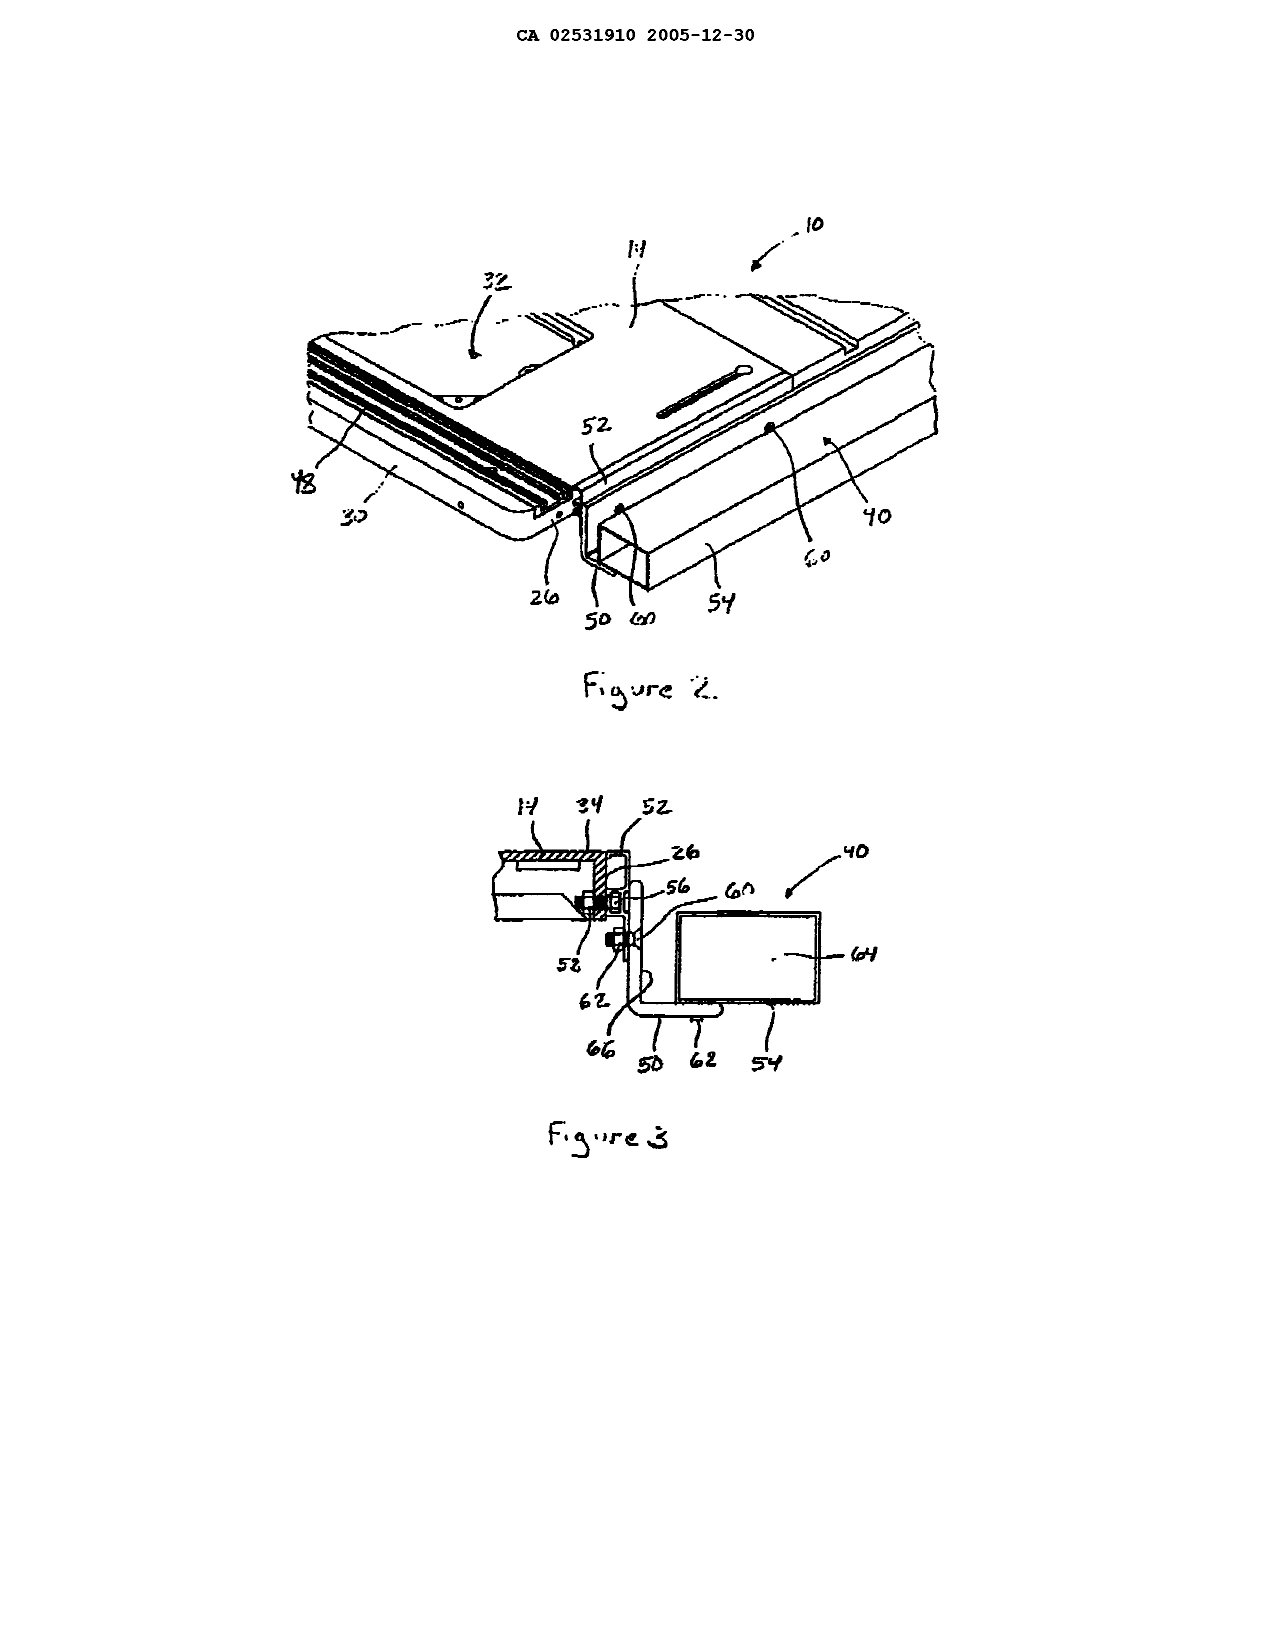 Canadian Patent Document 2531910. Drawings 20051230. Image 2 of 11